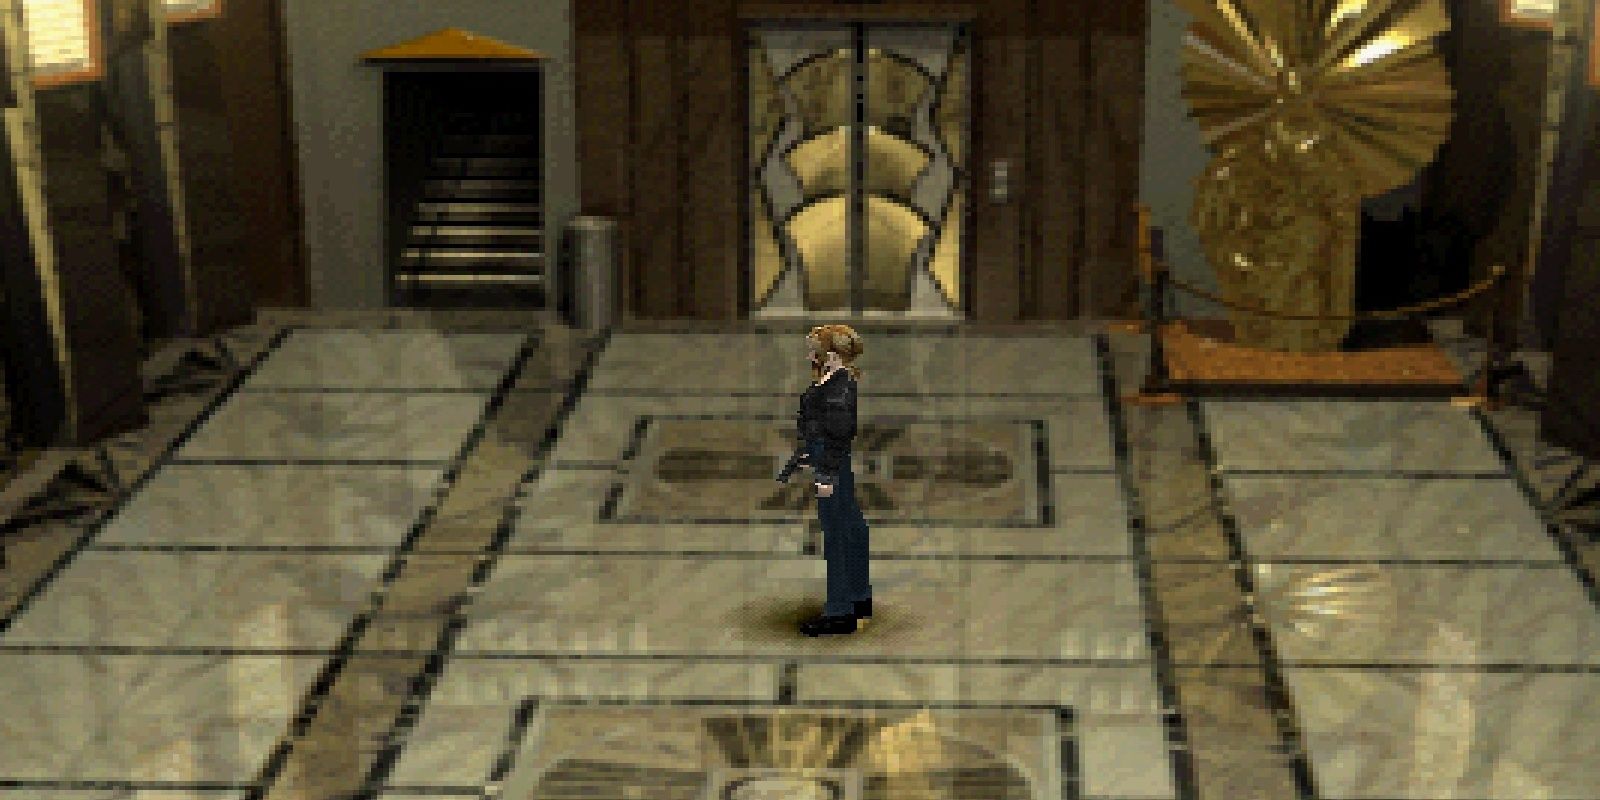 aya in the chrysler building on day 5 of EX Mode